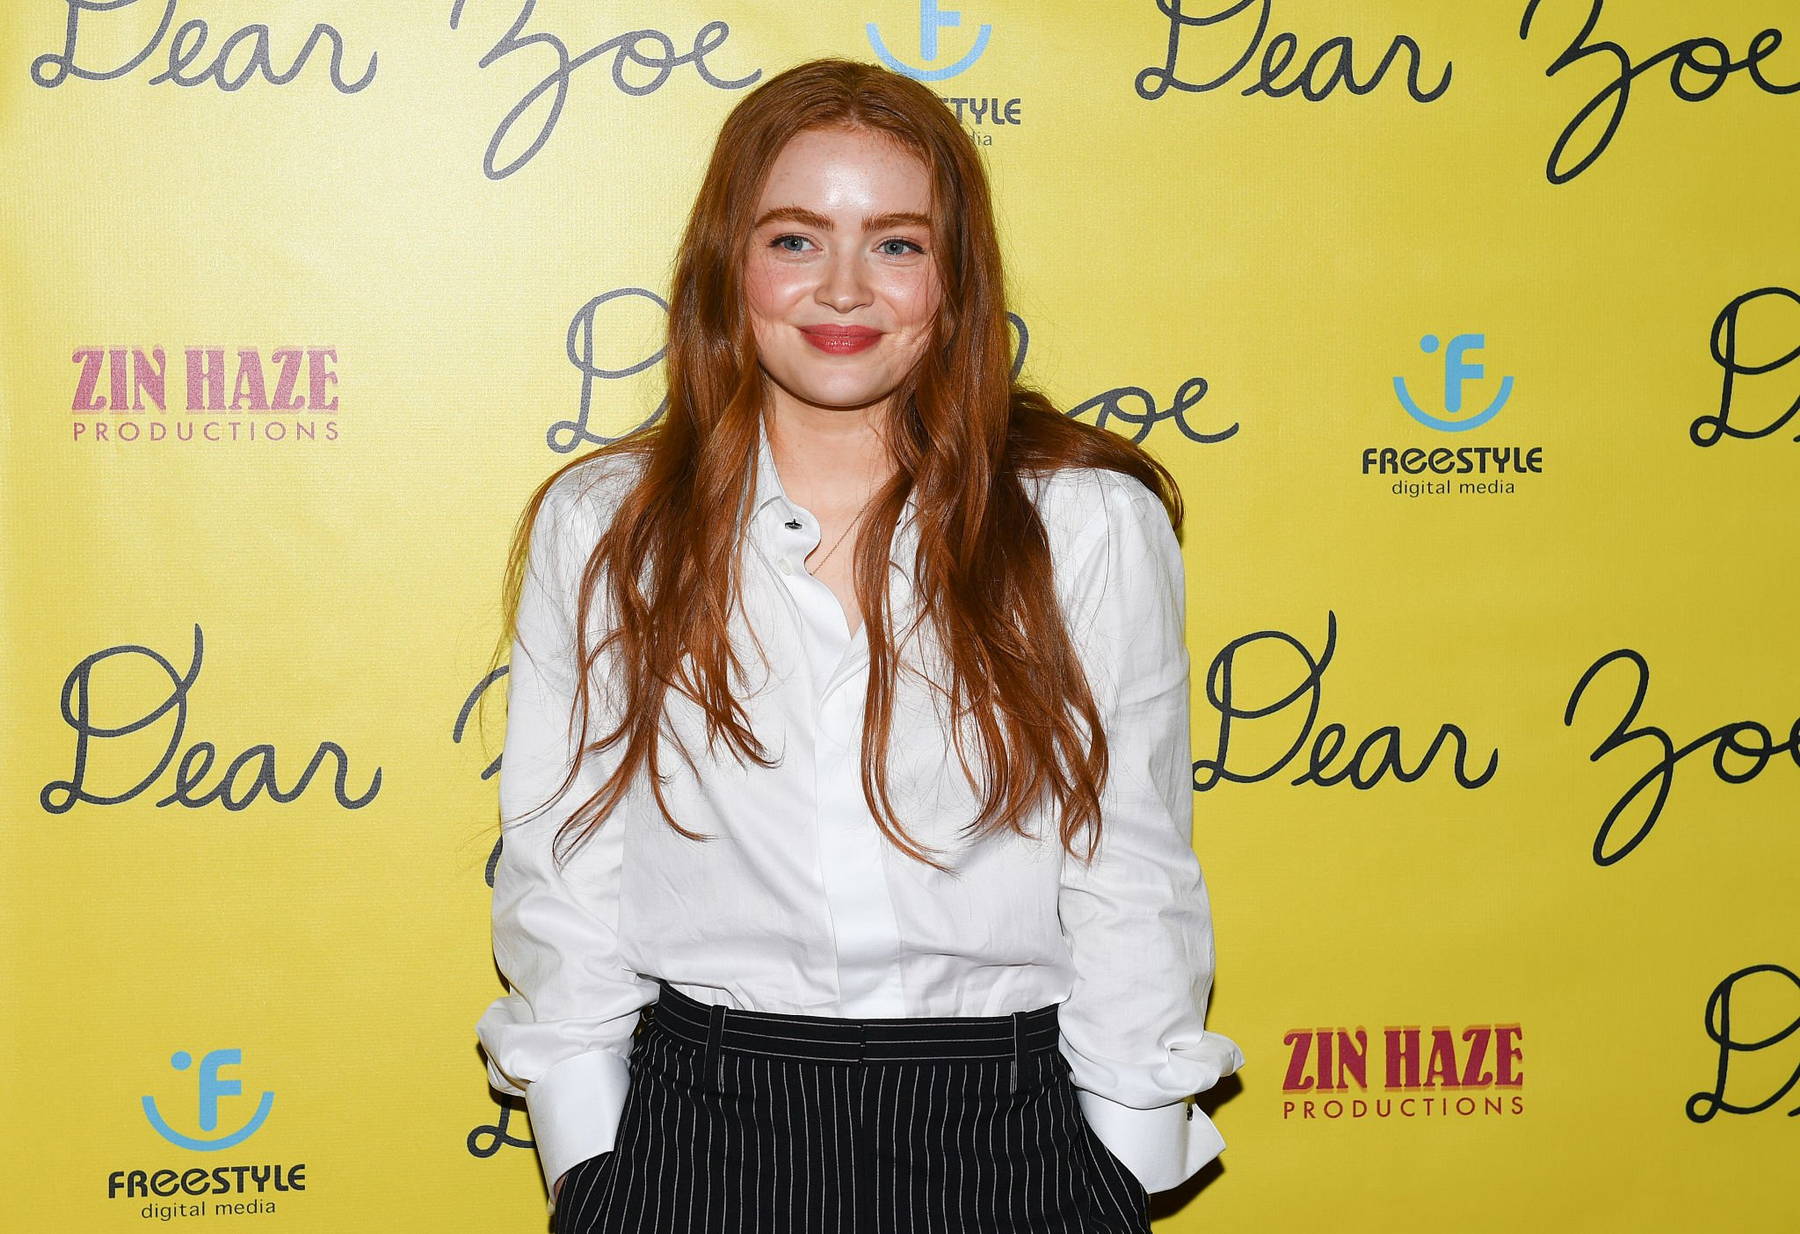 sadie sink attends the premiere of 'dear zoe' in pittsburgh